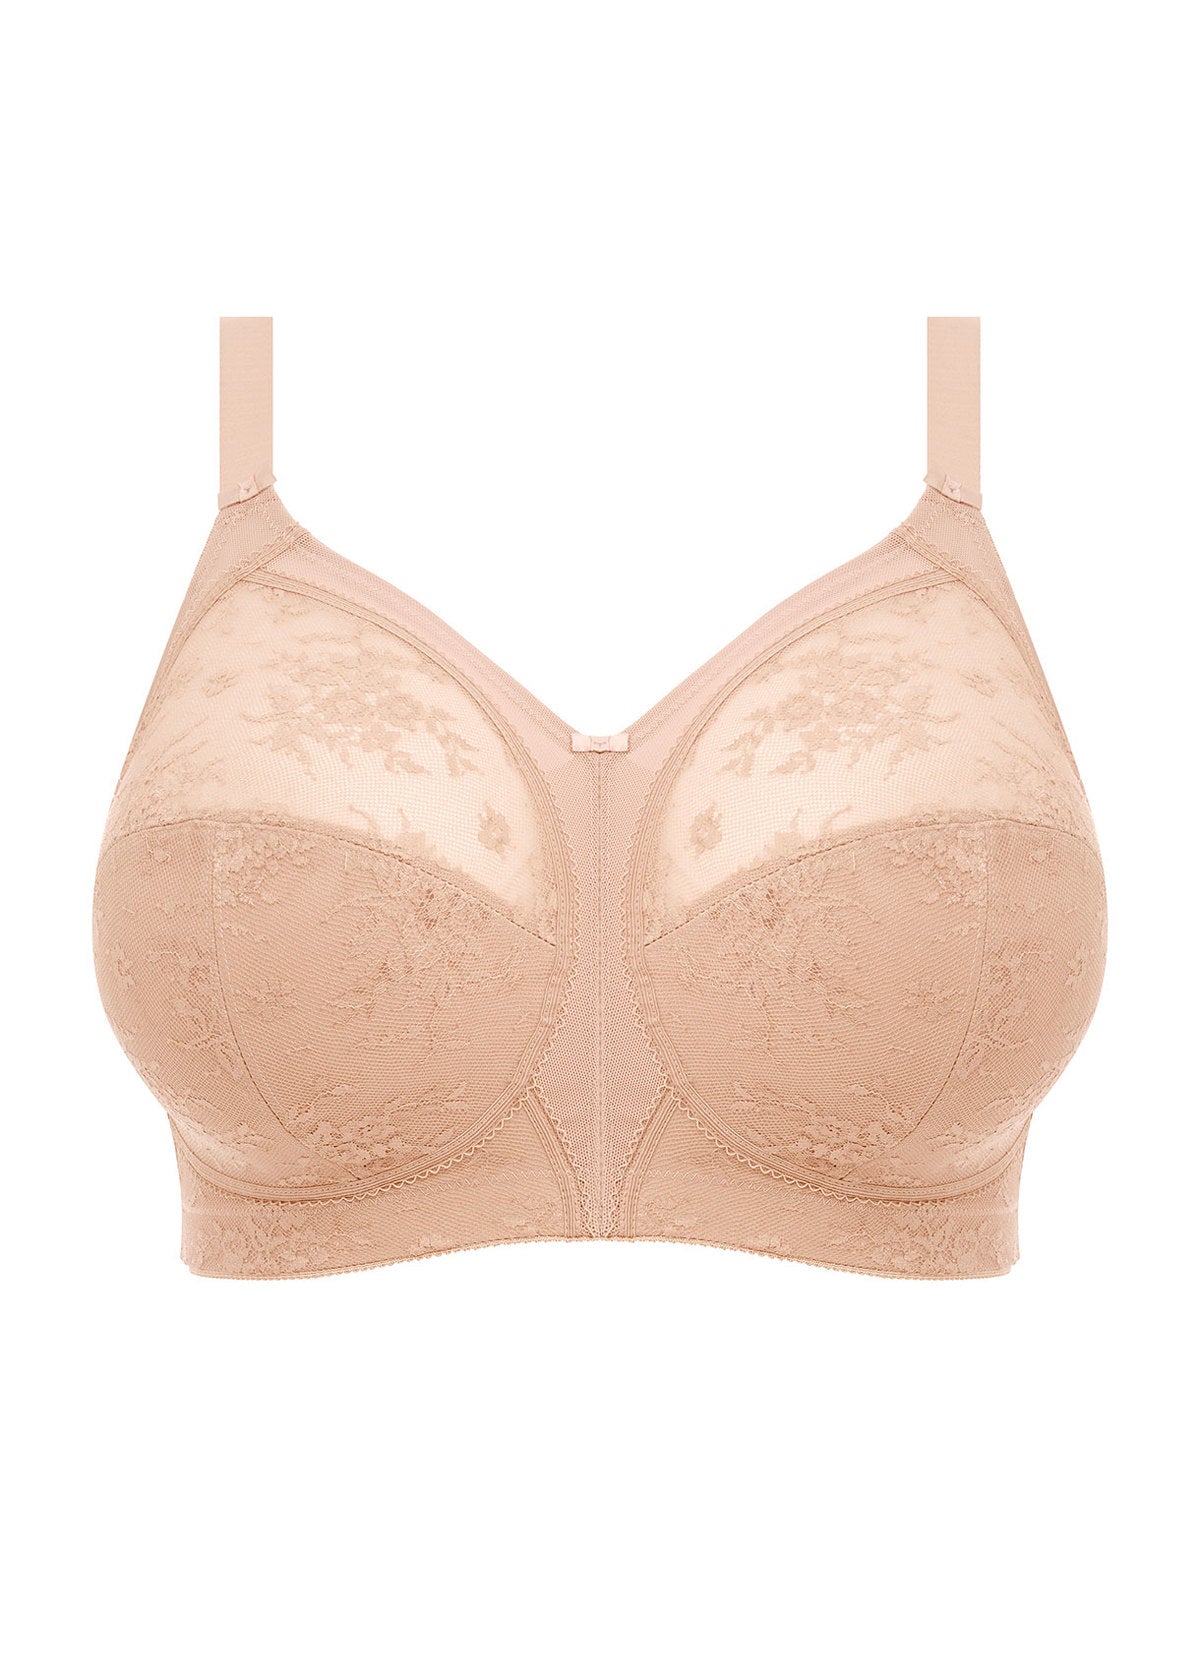 GODDESS VERITY SOFT CUP NON-WIRED BRA - FAWN